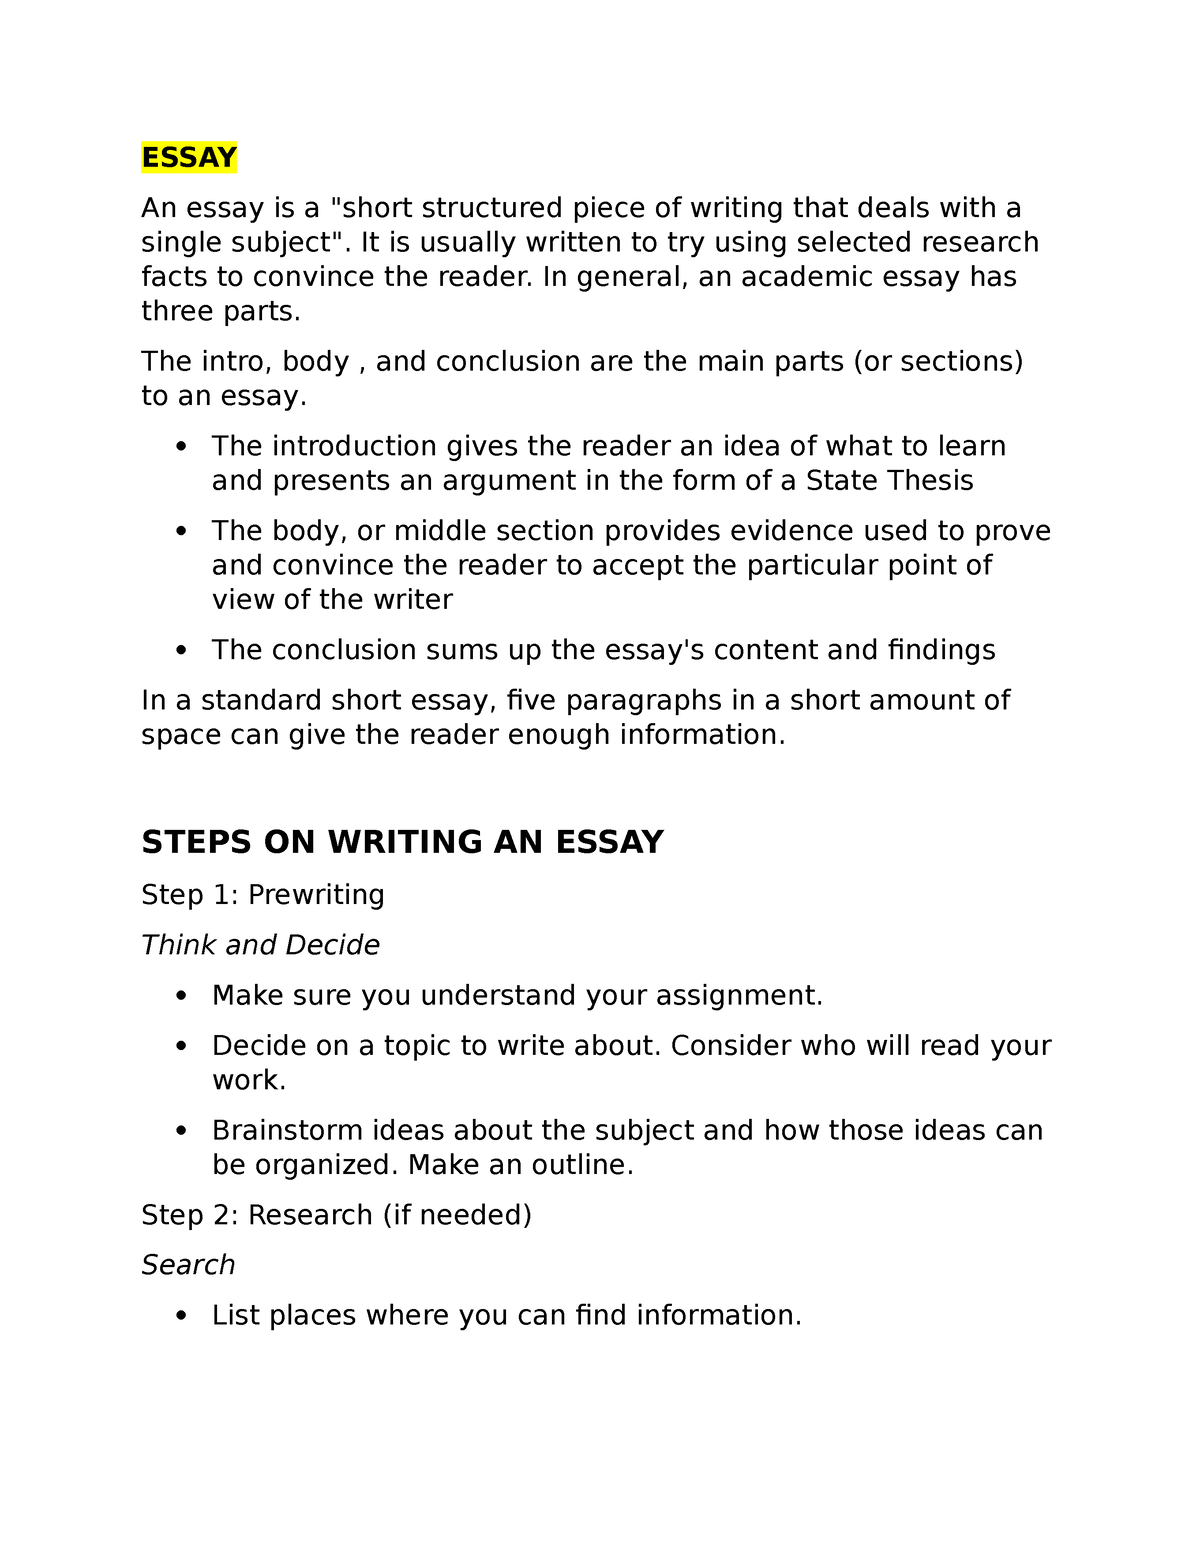 HOW TO MAKE AN Essay - ENGLISH TOPICS - ESSAY An essay is a 